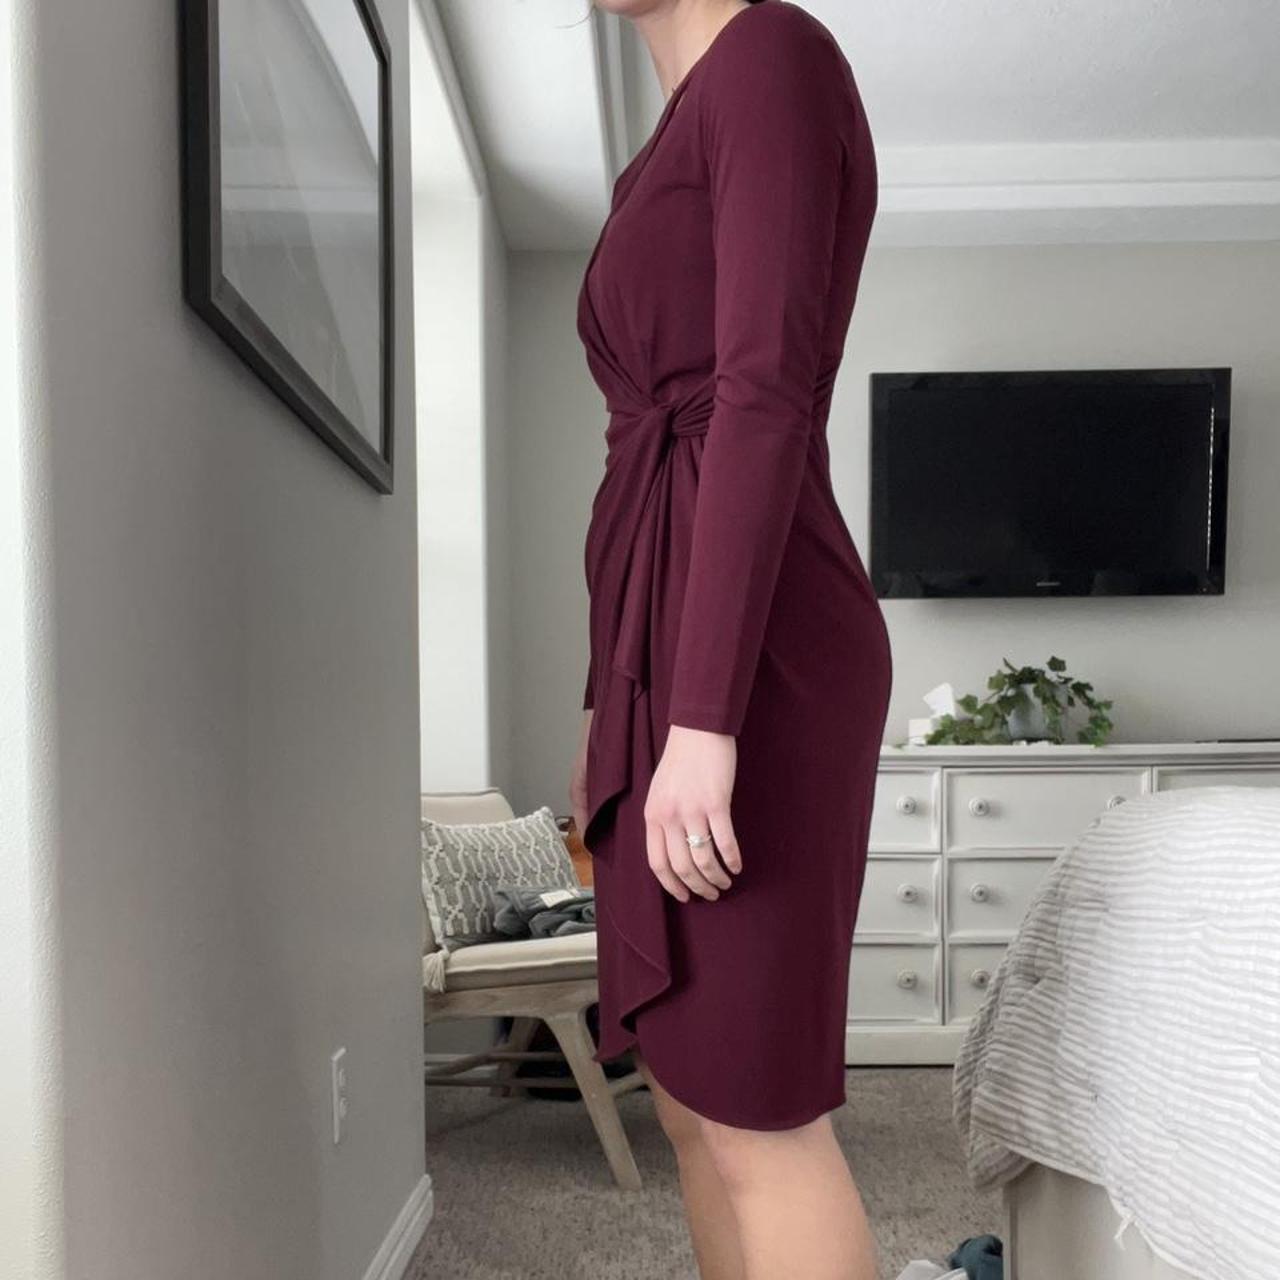 Product Image 2 - Long sleeve plum colored dress,